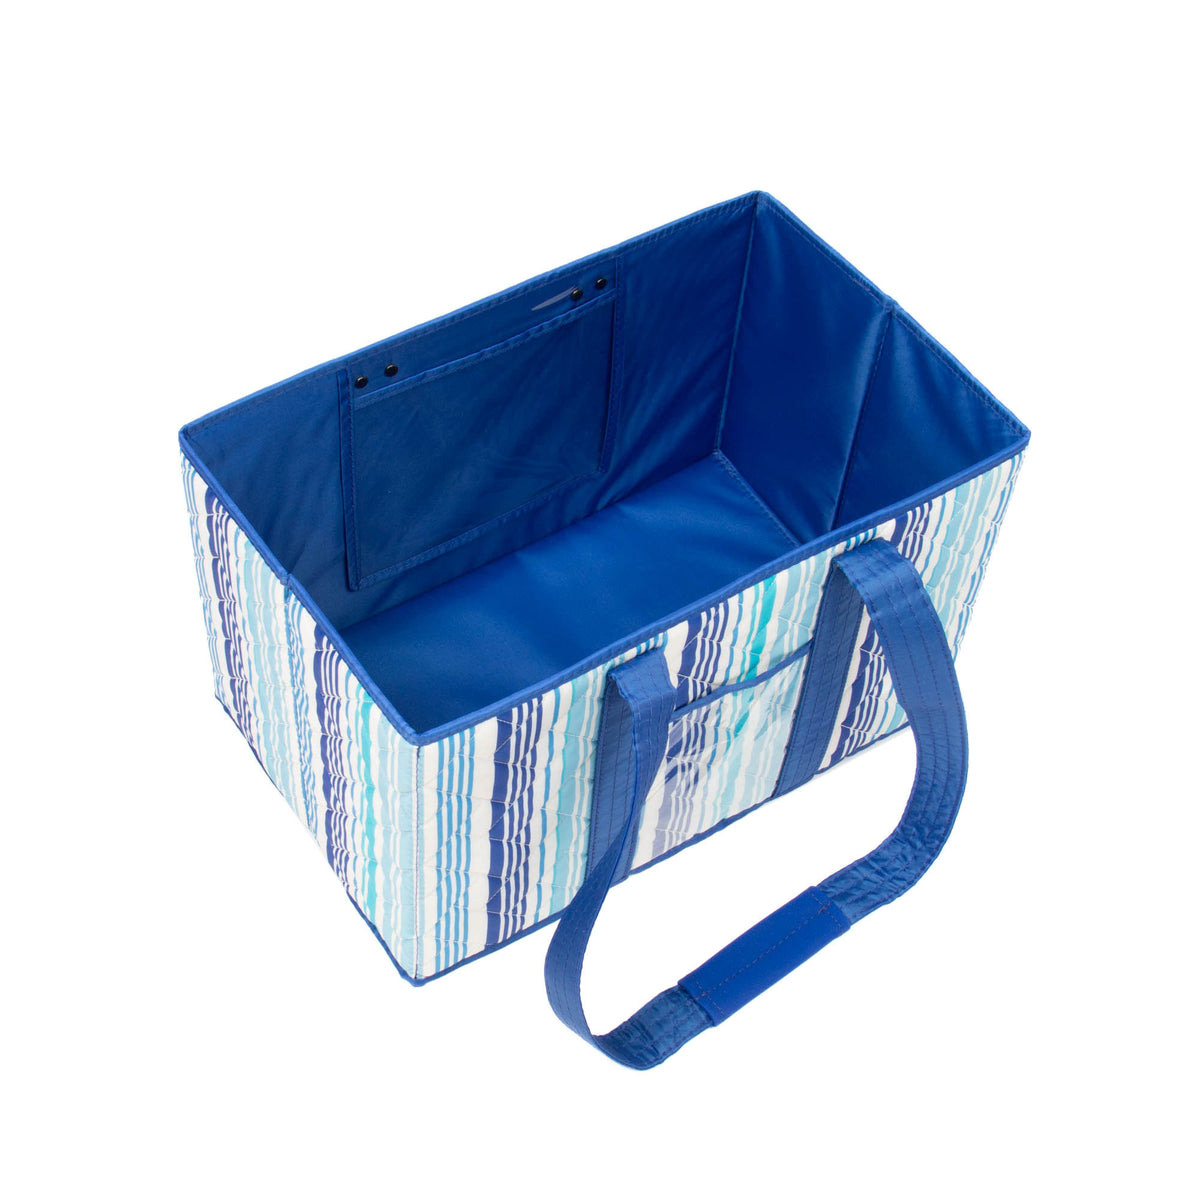 Gallop Collapsible Carry-All Tote